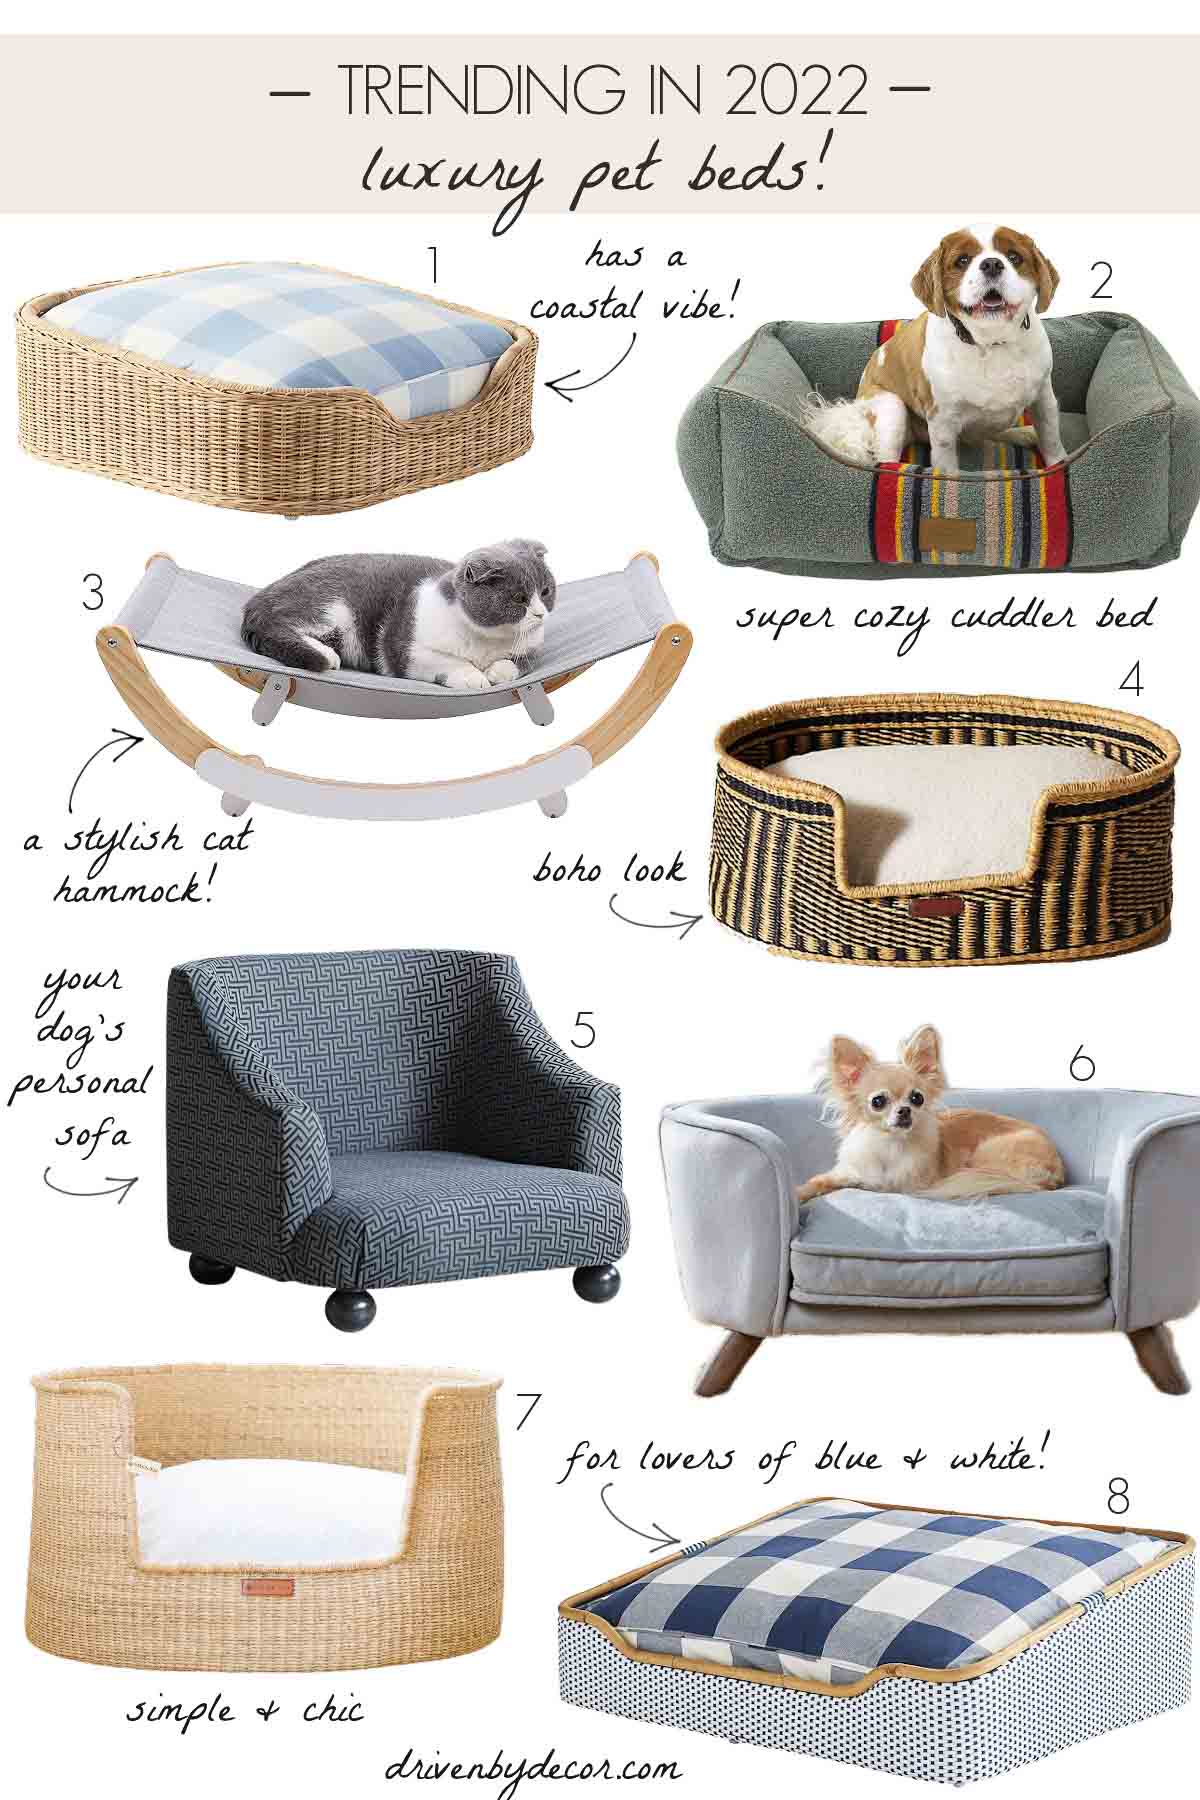 Pet friendly architecture and luxury dog beds are trending in 2022